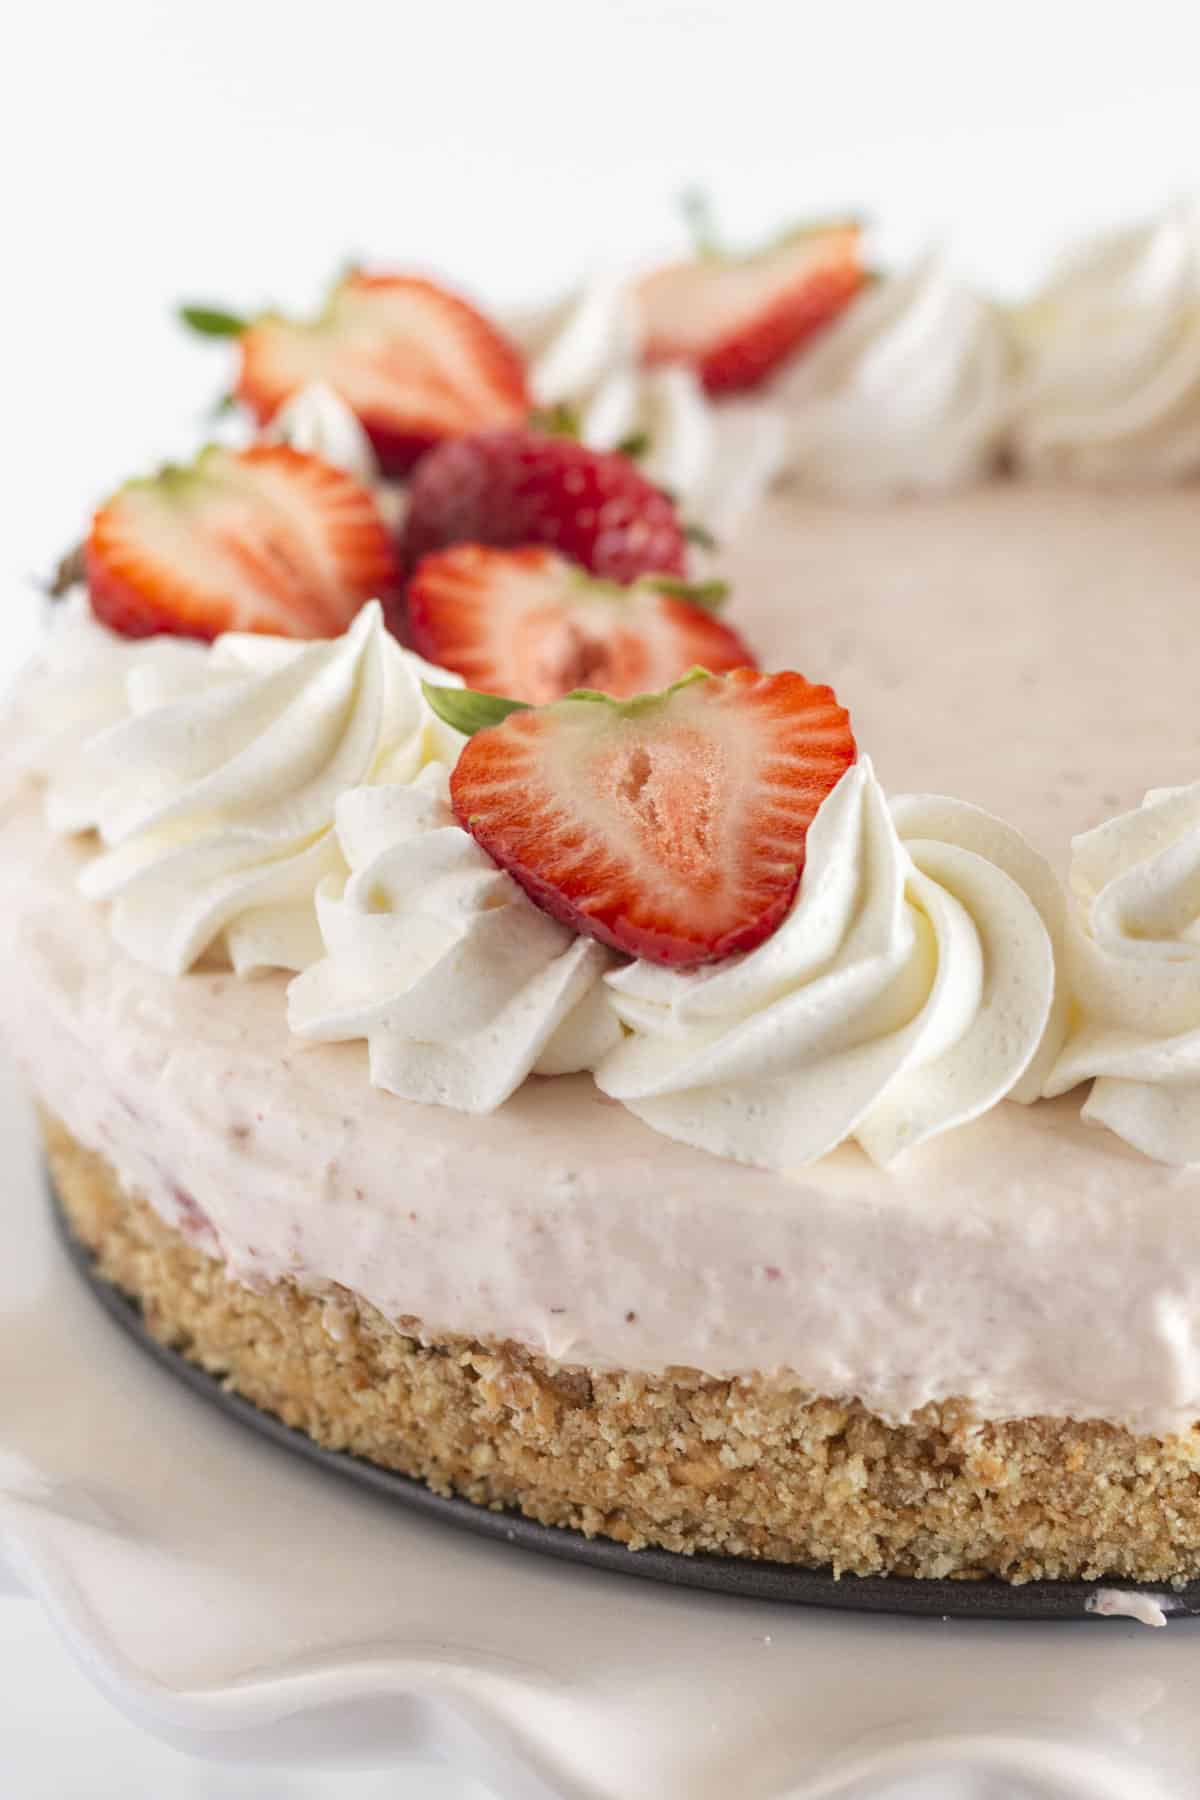 A fresh strawberry cheesecake that is ready to serve.